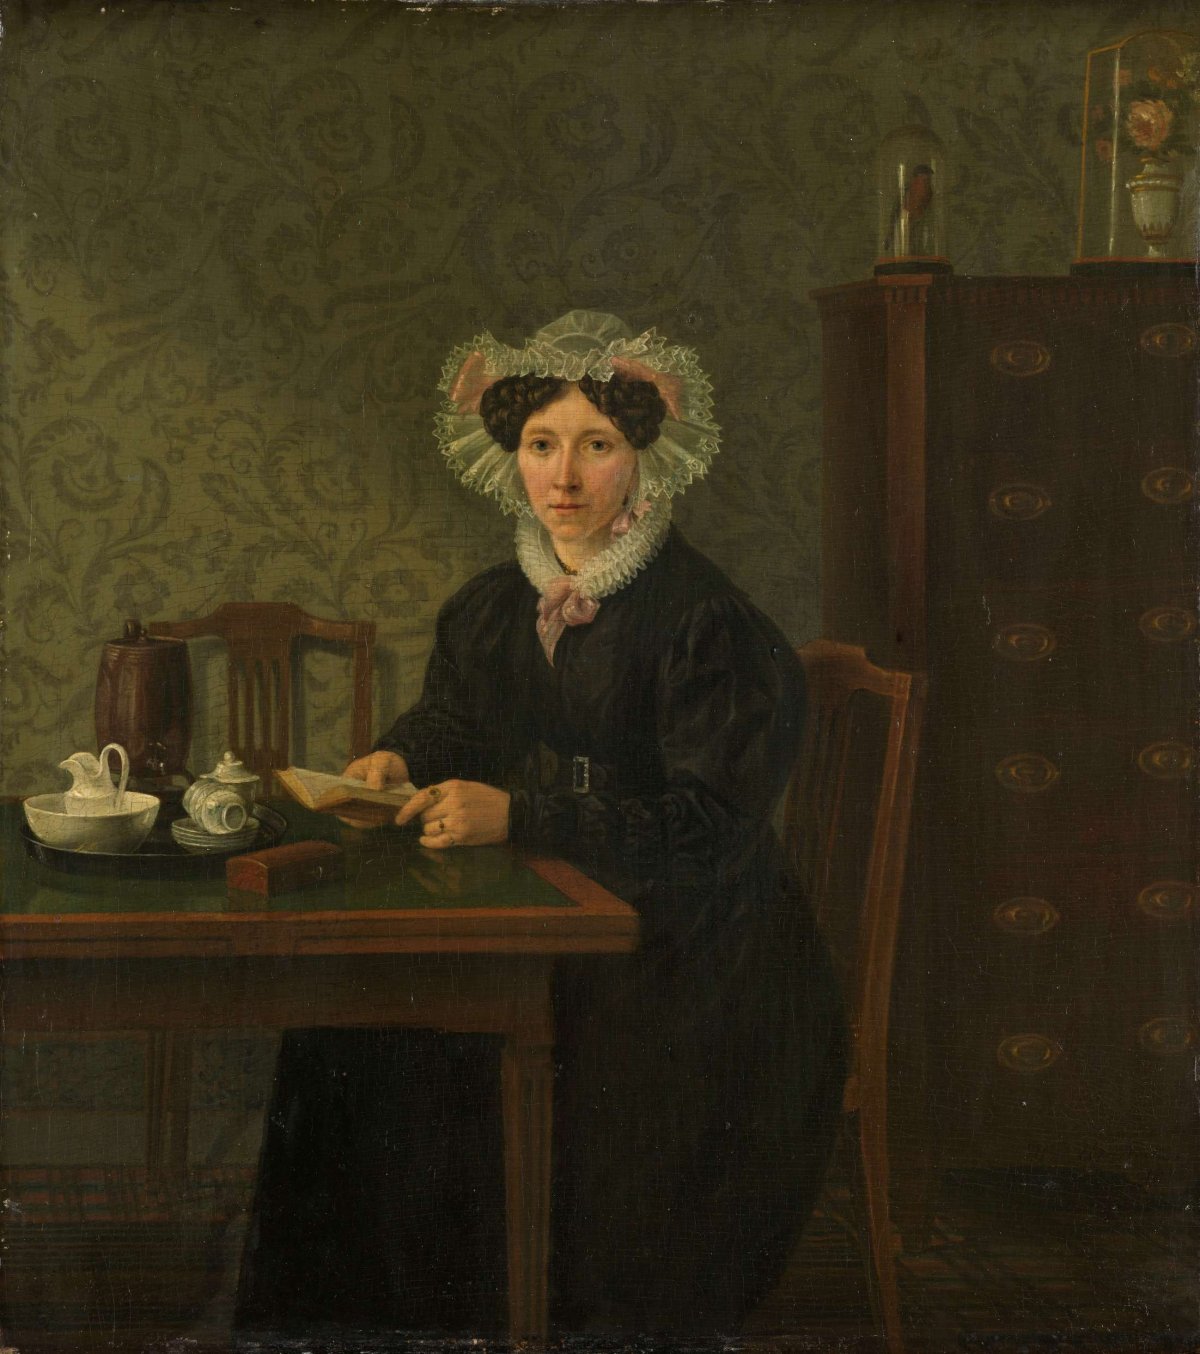 Portrait of a Woman, Willem Uppink, 1833